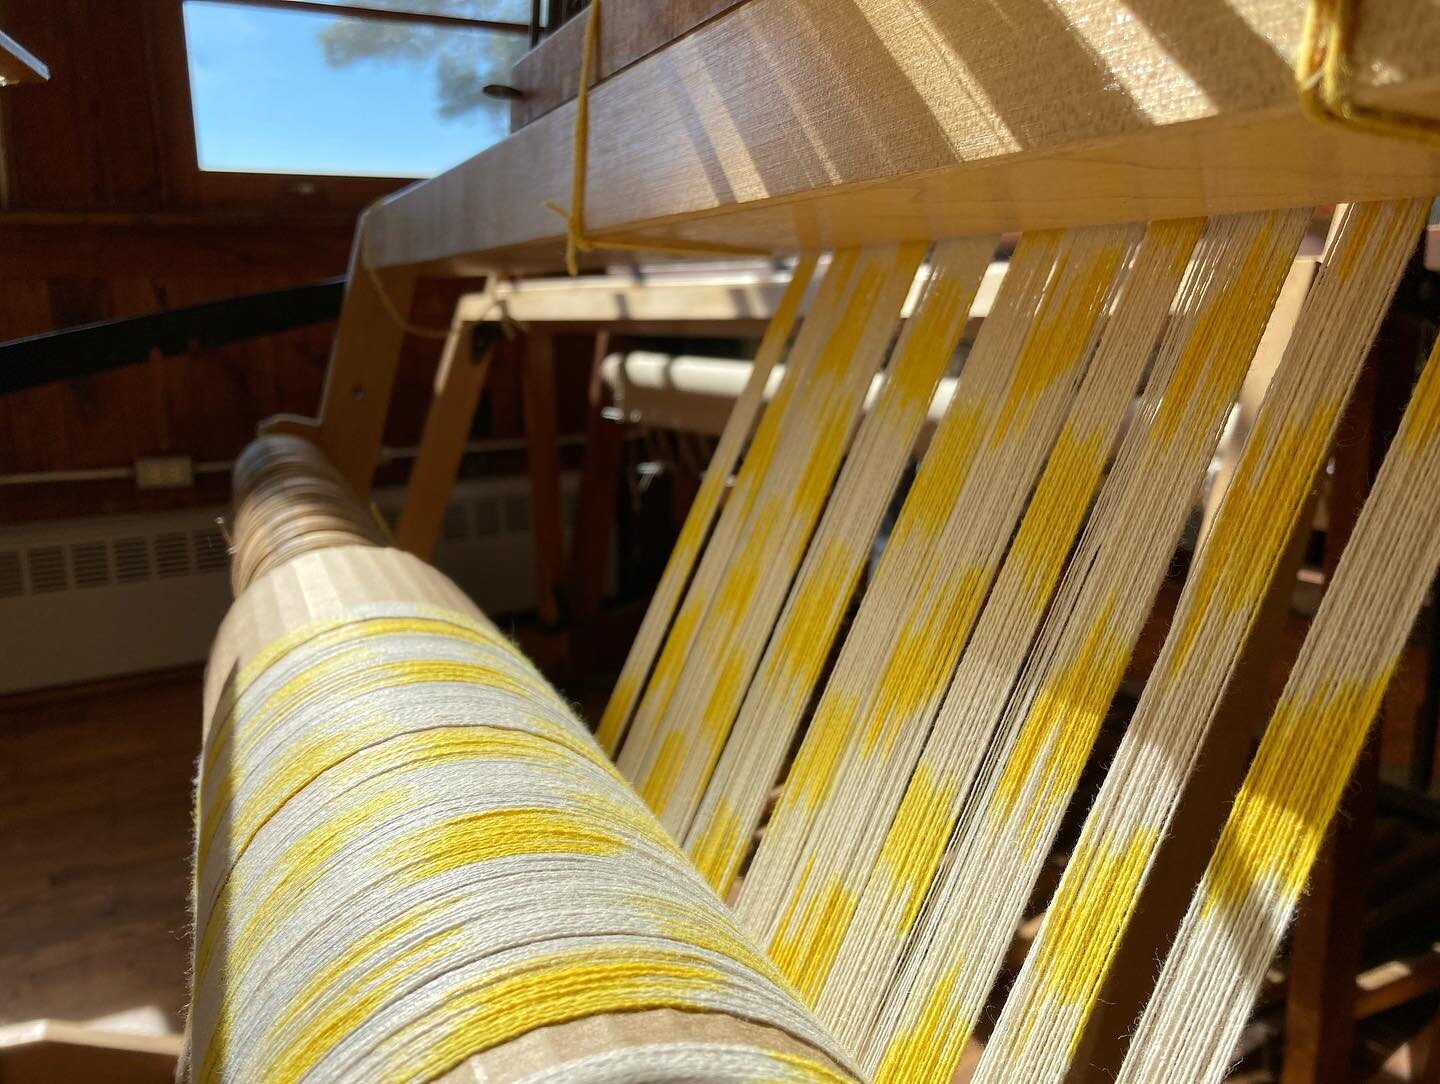 completely and utterly enchanted by this ikat warp @penlandtextiles // what stuck out to me most in my dictionary of symbols reference is that, in Mexican cosmology, yellow is the color of the mysteries of renewal, since fields turn yellow in spring 